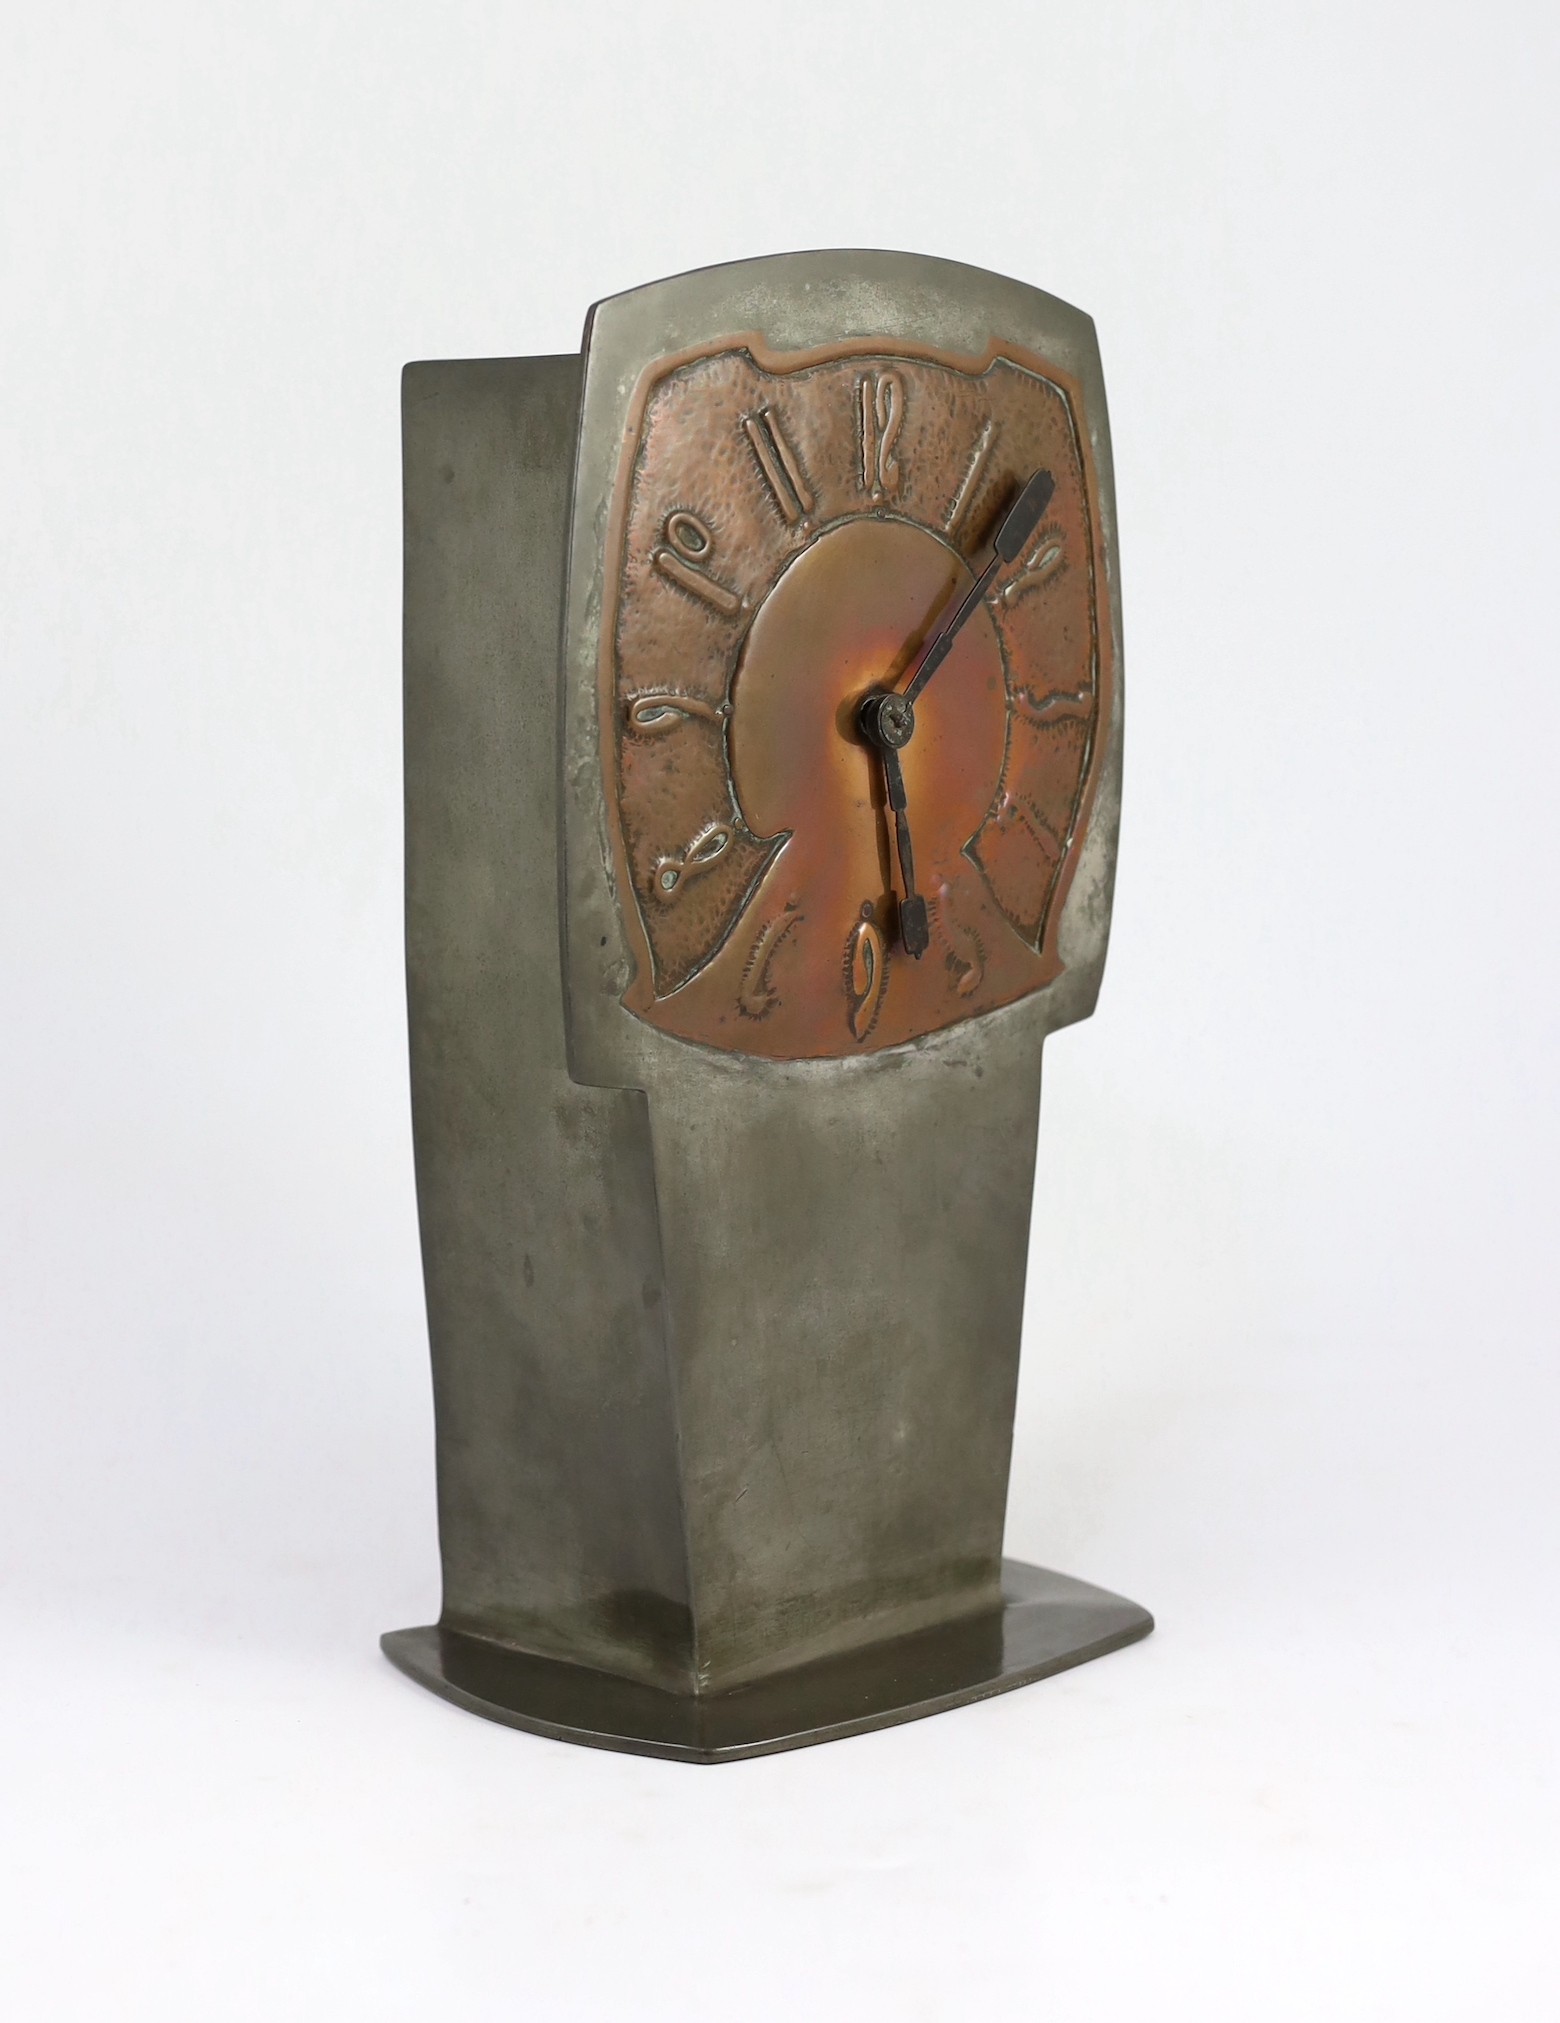 Archibald Knox for Liberty & Co., a rare ‘Tudric’ pewter and patinated copper clock, c.1902-05, model no. 0253